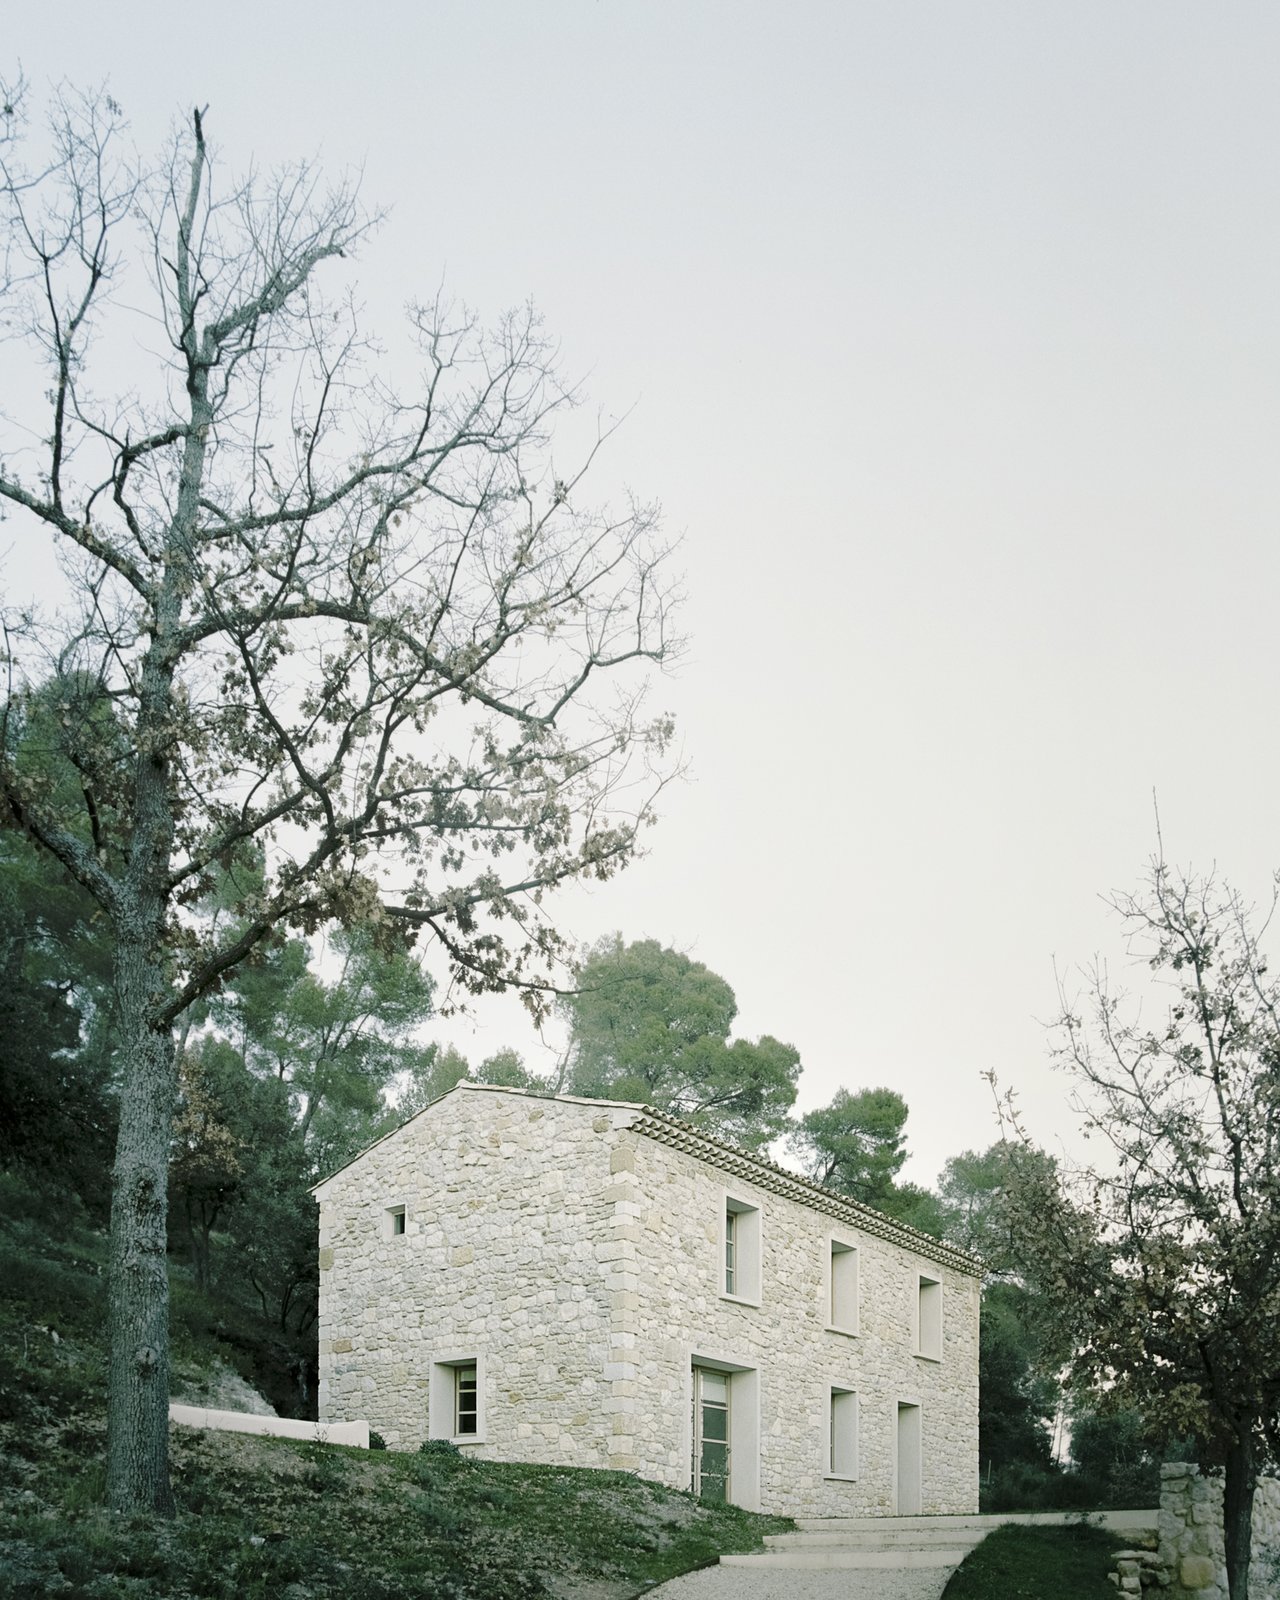 Architect Timothee Mercier of Studio XM converted a crumbling farmhouse into a residence for his parents.